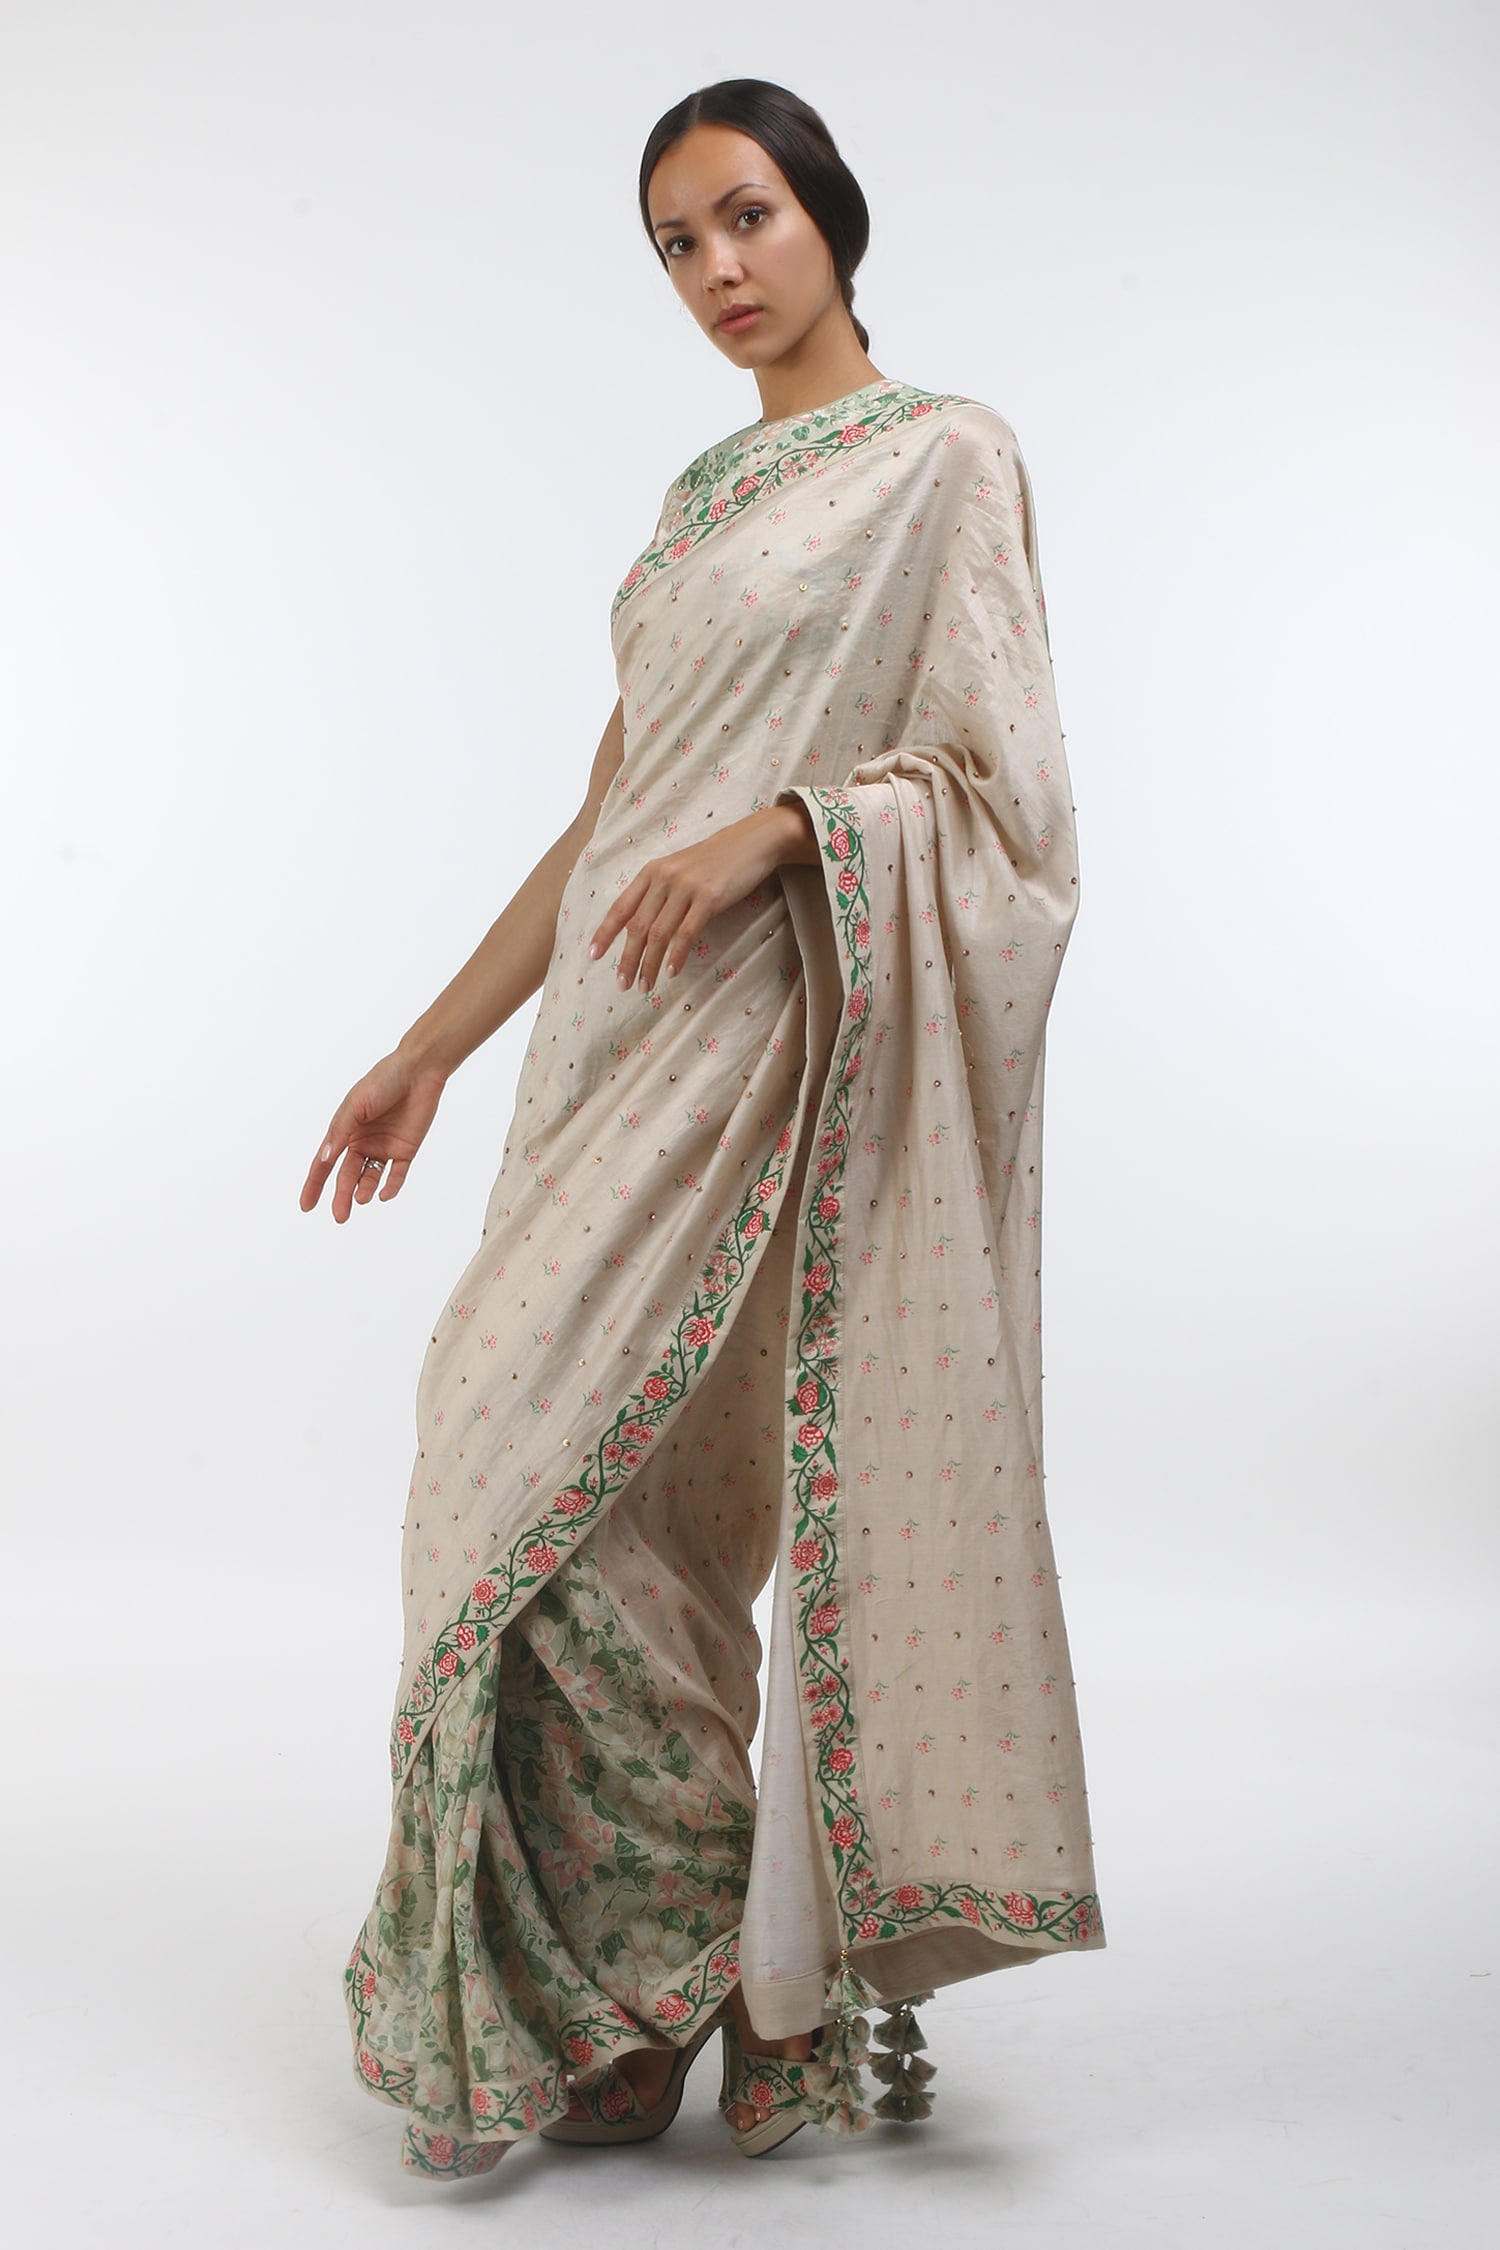 Nikasha Grey Round Hand Painted Saree With Blouse For Women